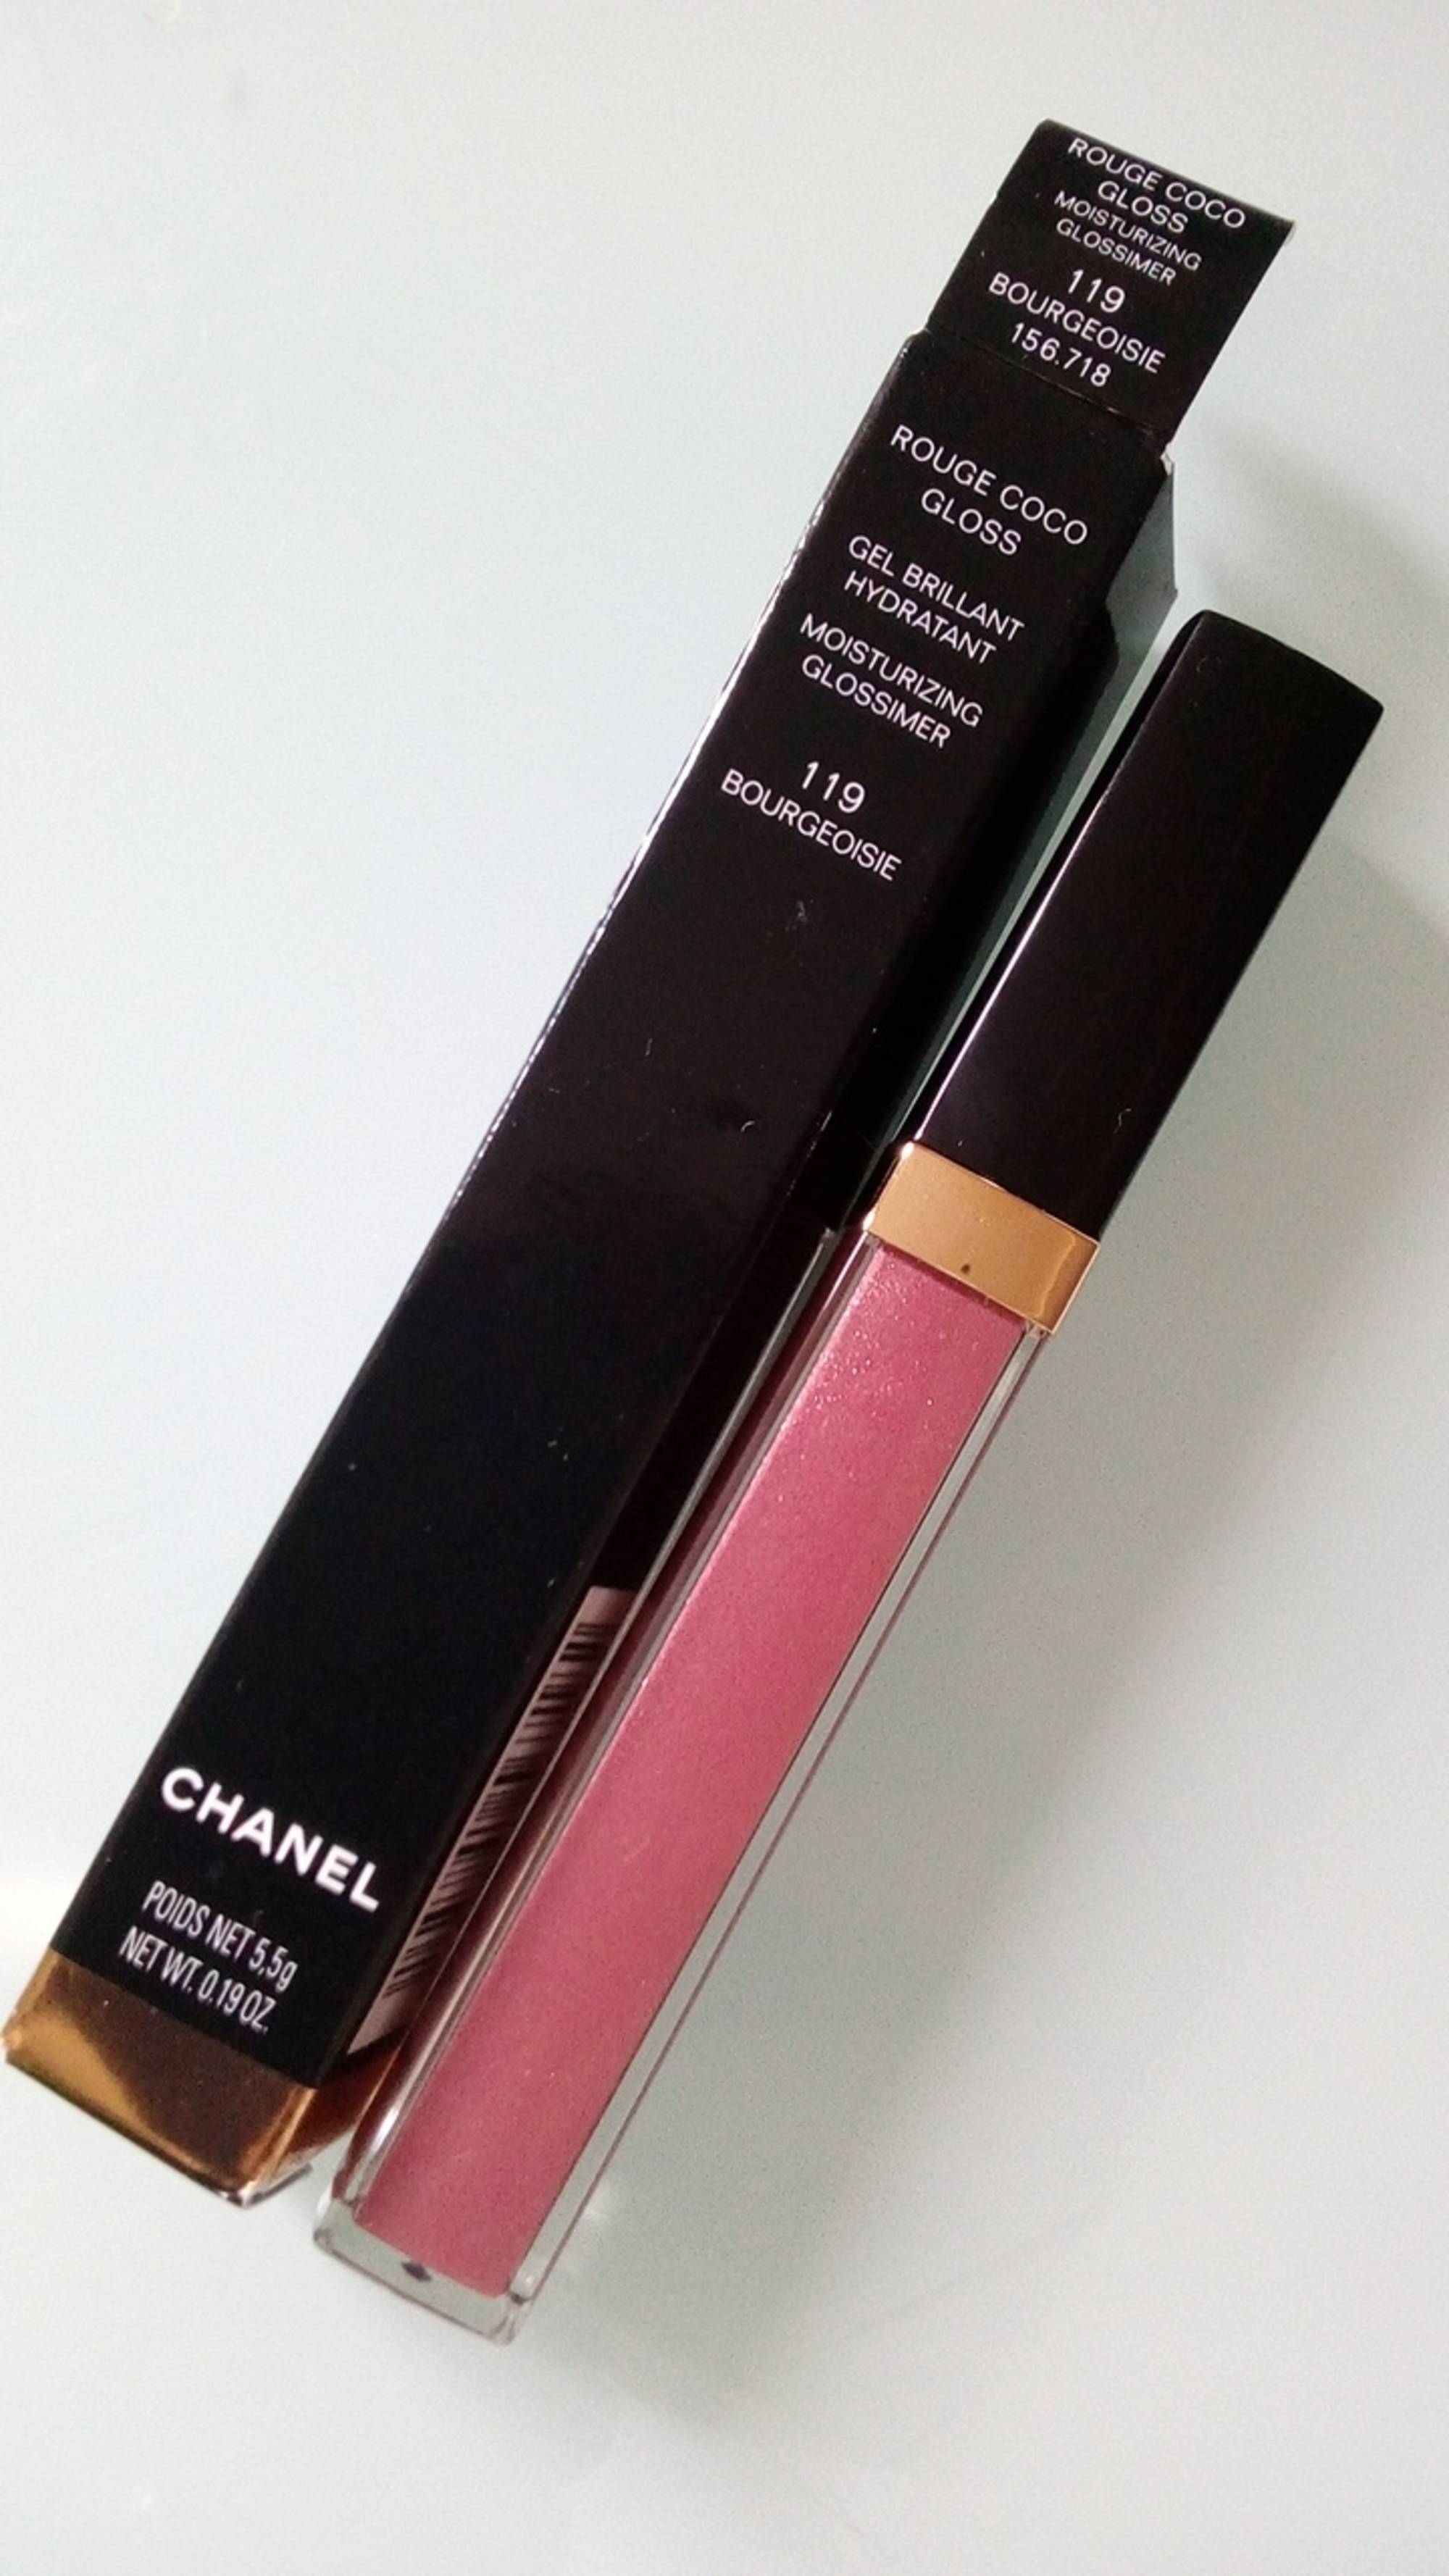 Chanel Rouge Coco Gloss Moisturizing Glossimer - # 166 Physical